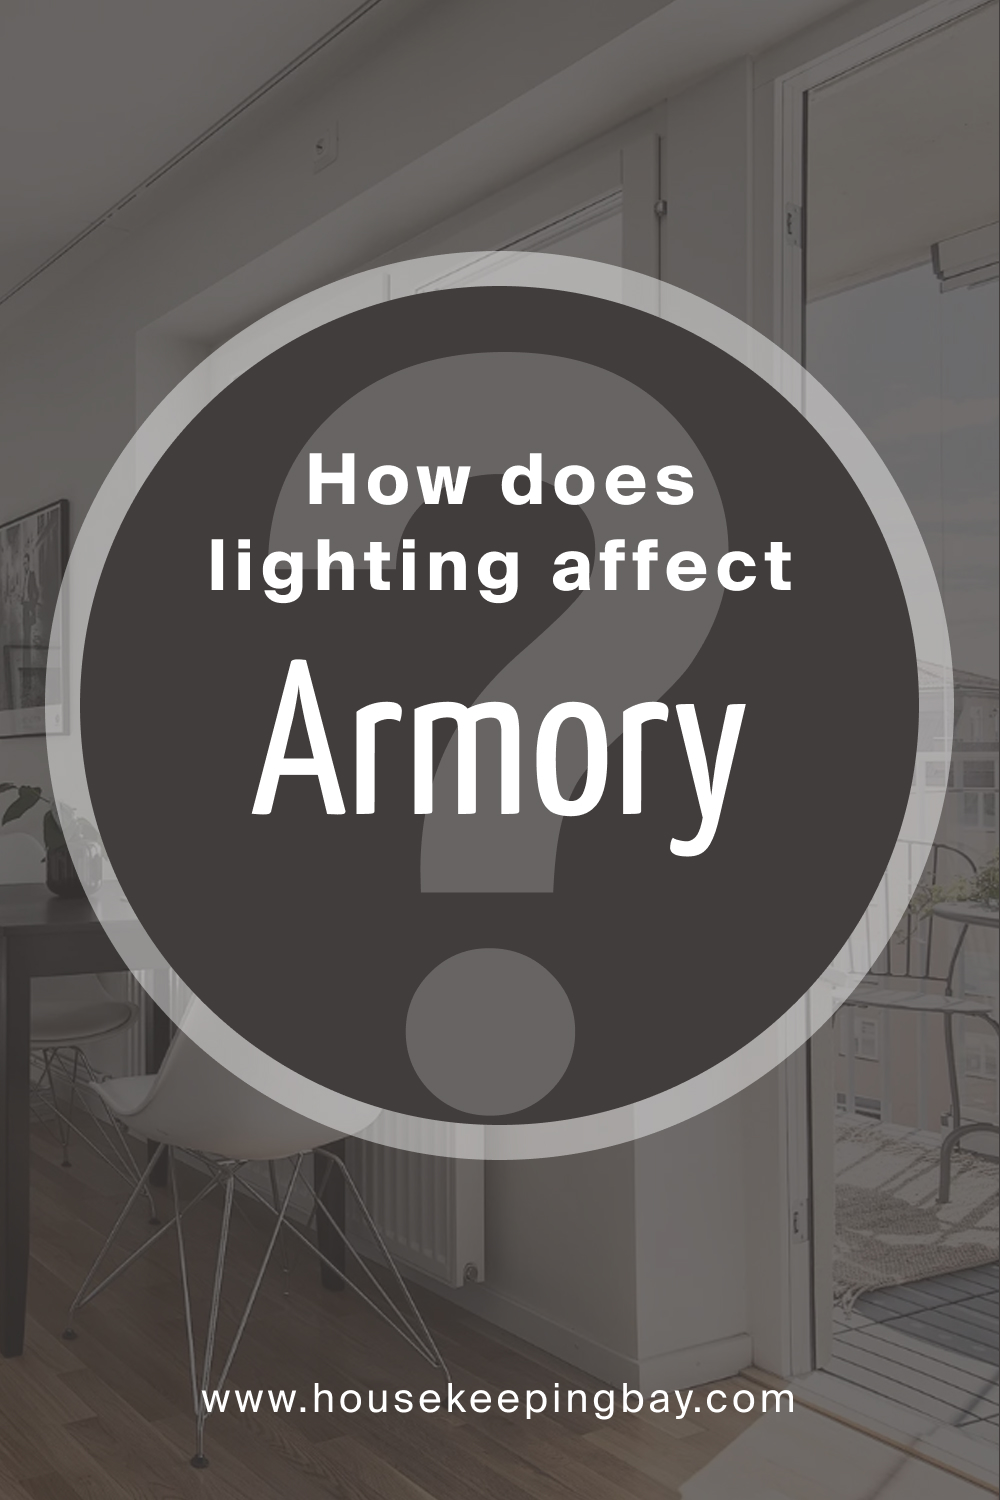 How does lighting affect SW 9600 Armory